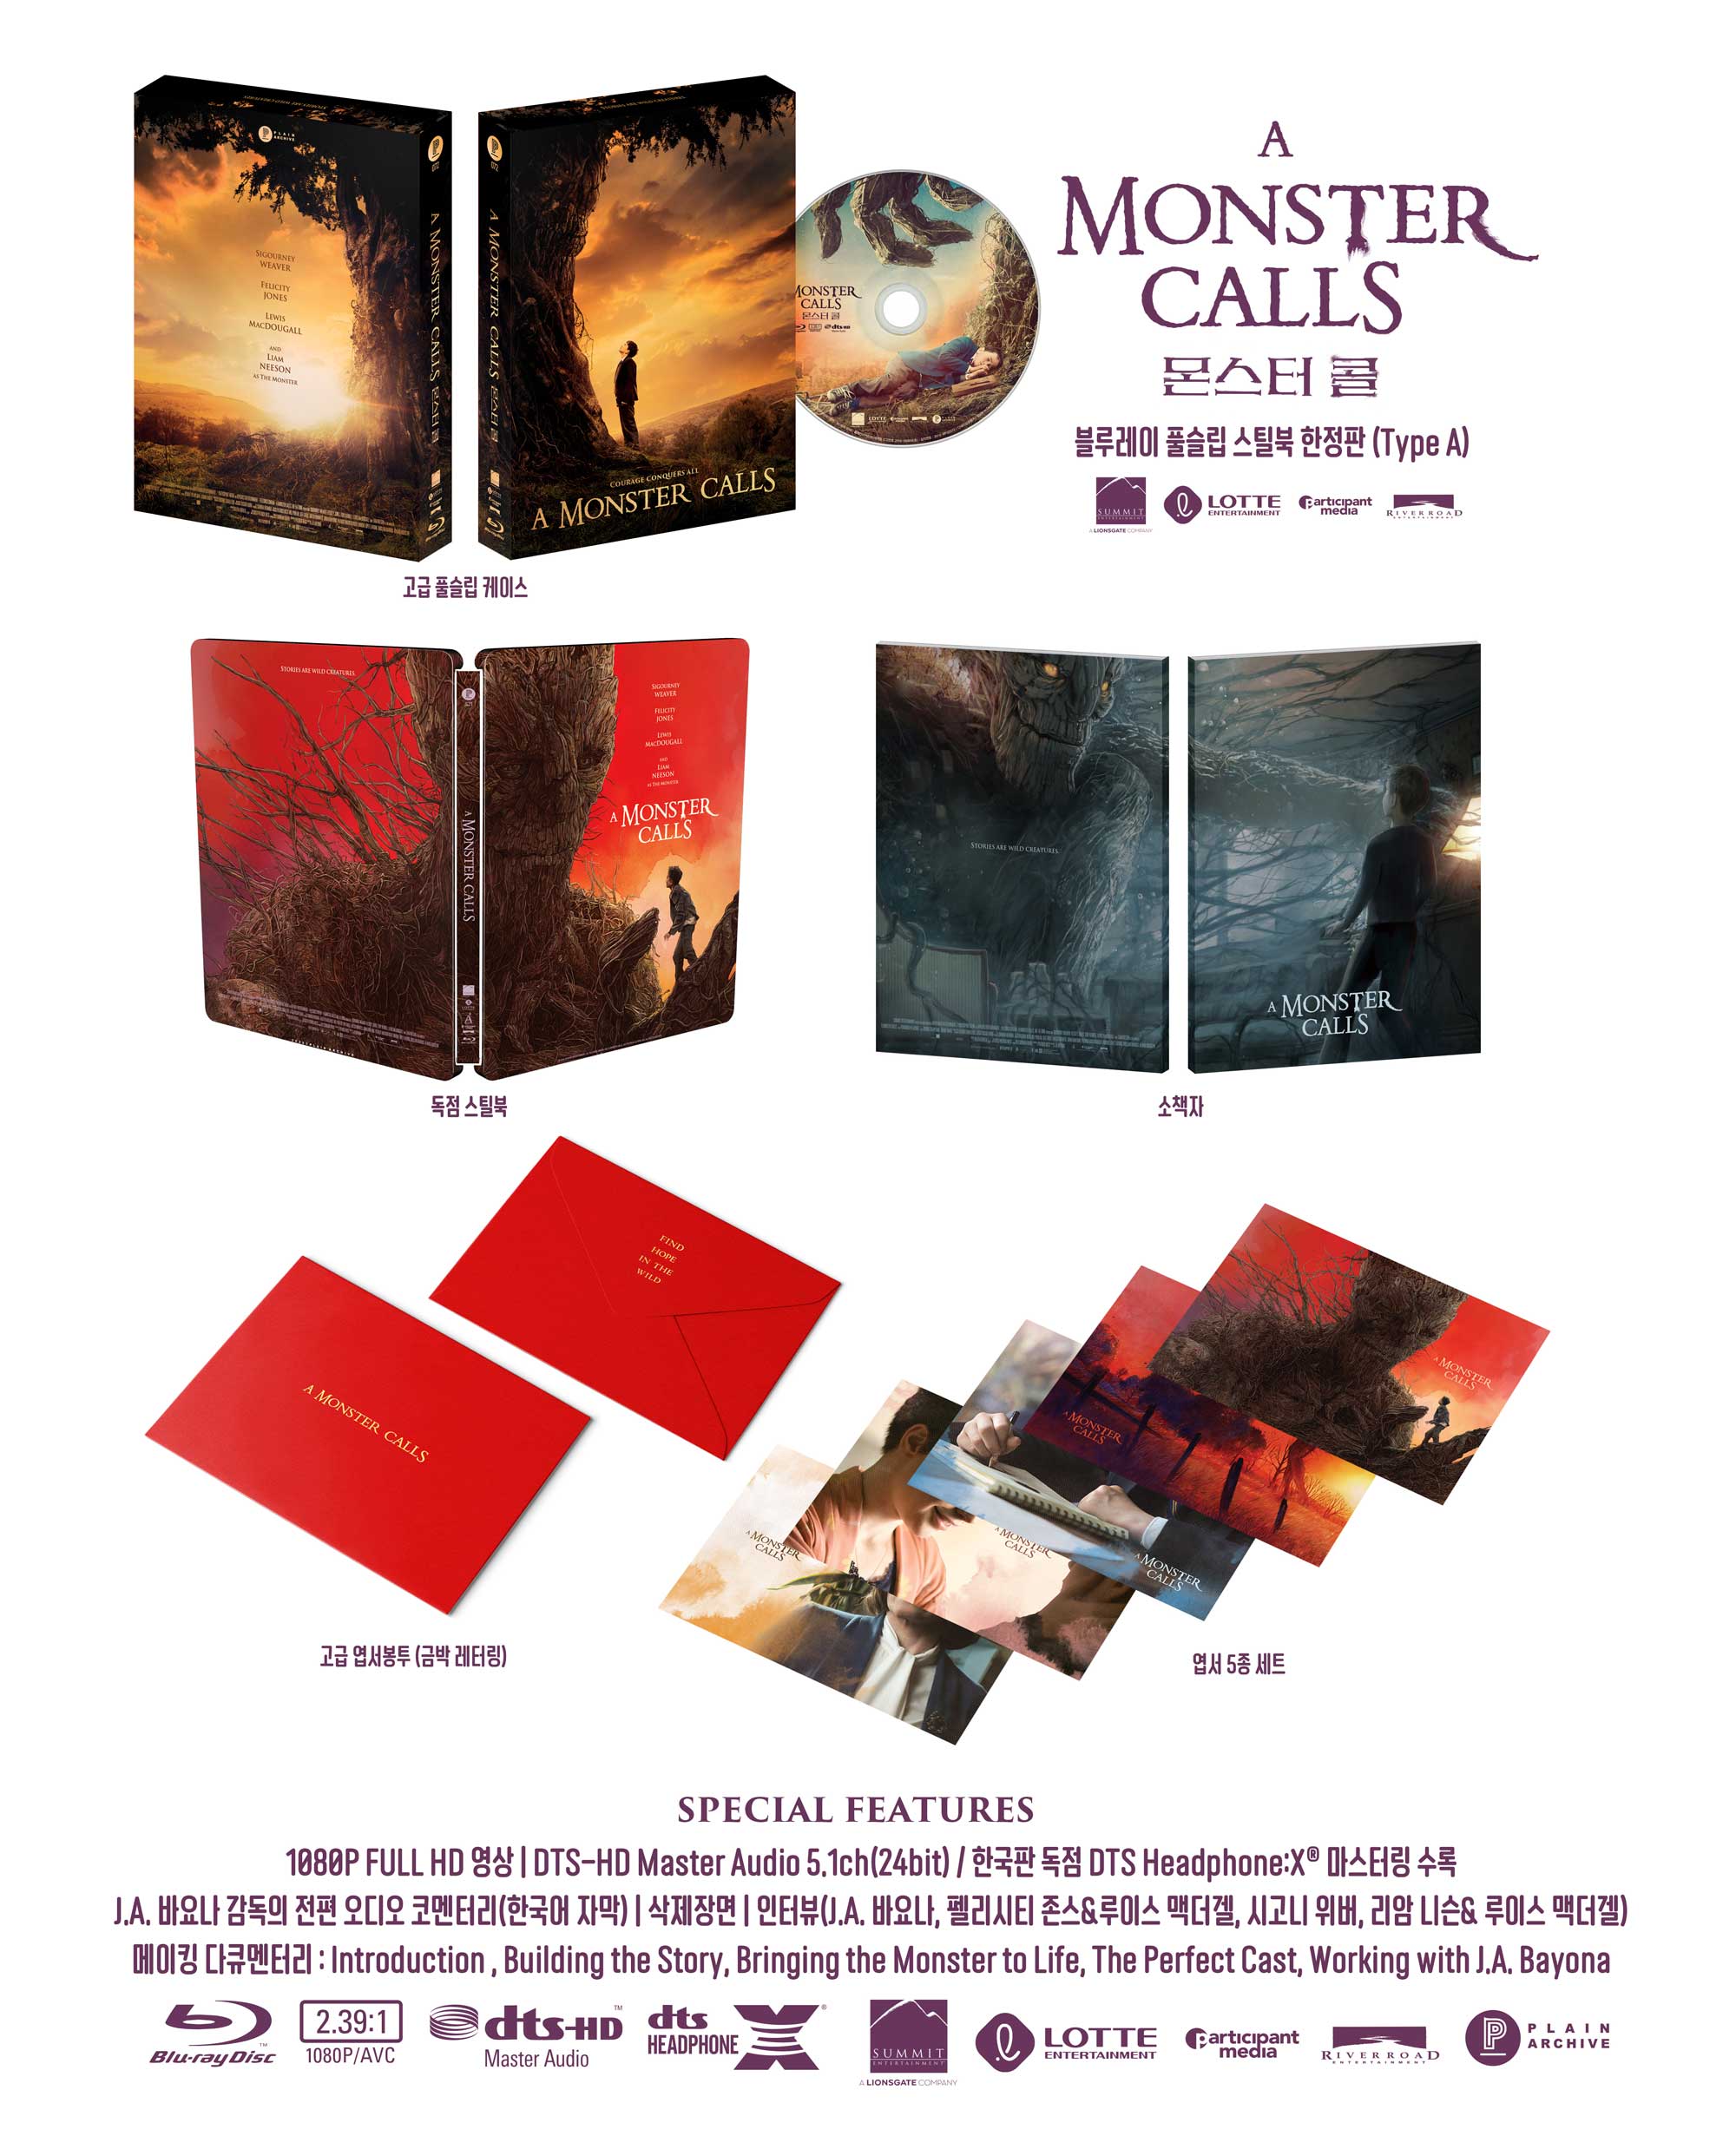 A Monster Calls: Steelbook with Full Slip (Type A) - PLAIN ARCHIVE